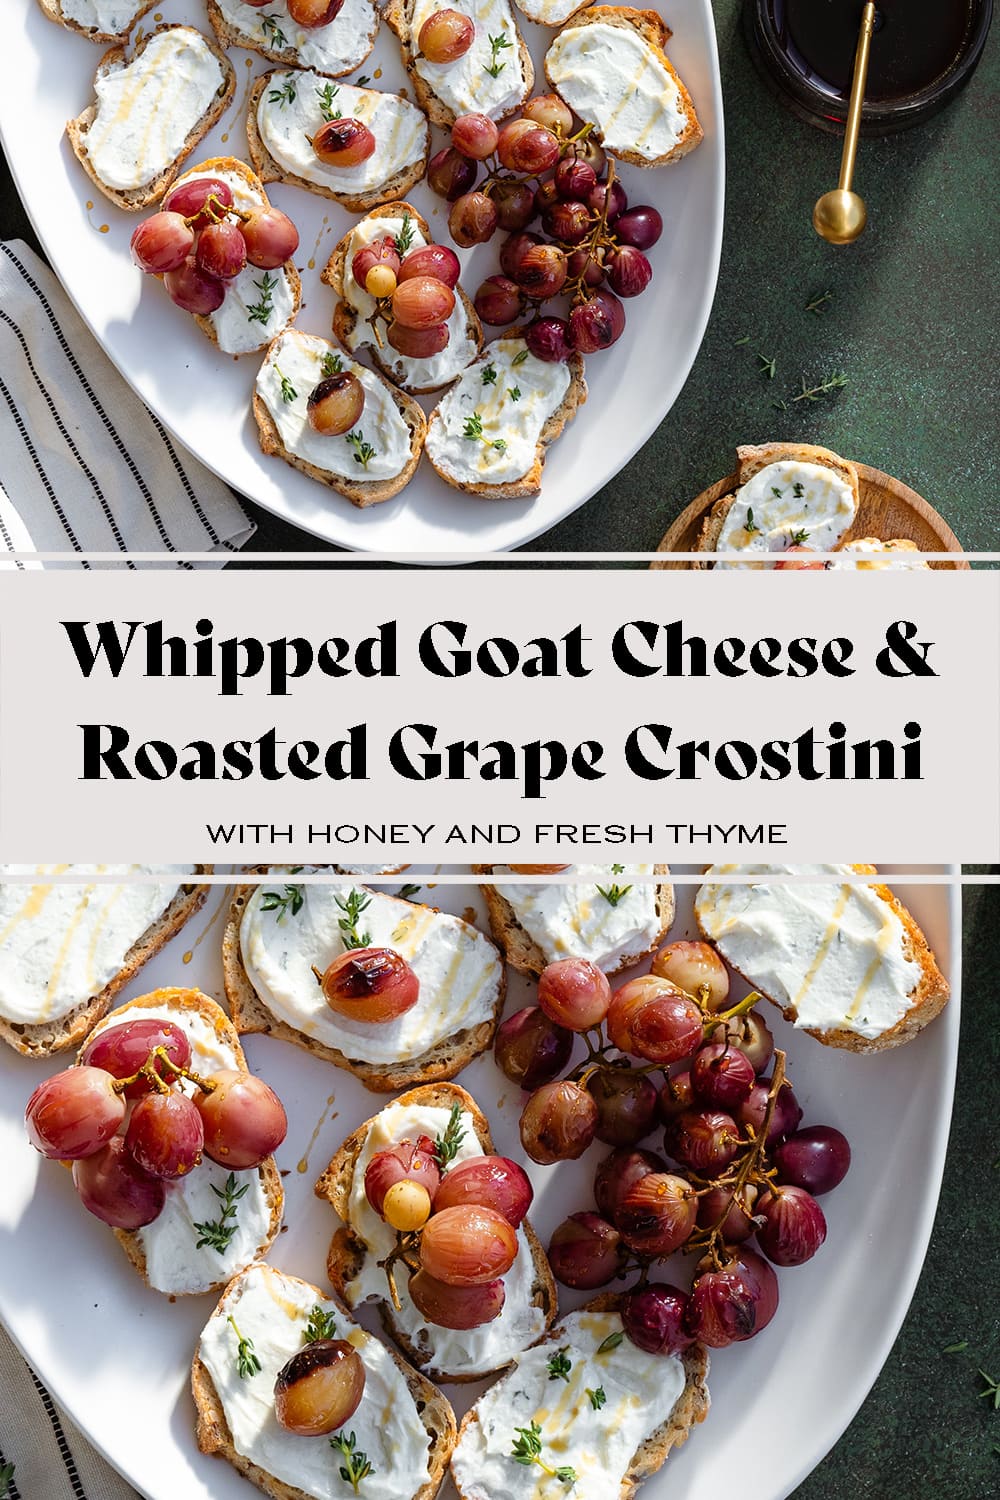 Whipped Goat Cheese Crostini with Roasted Grapes